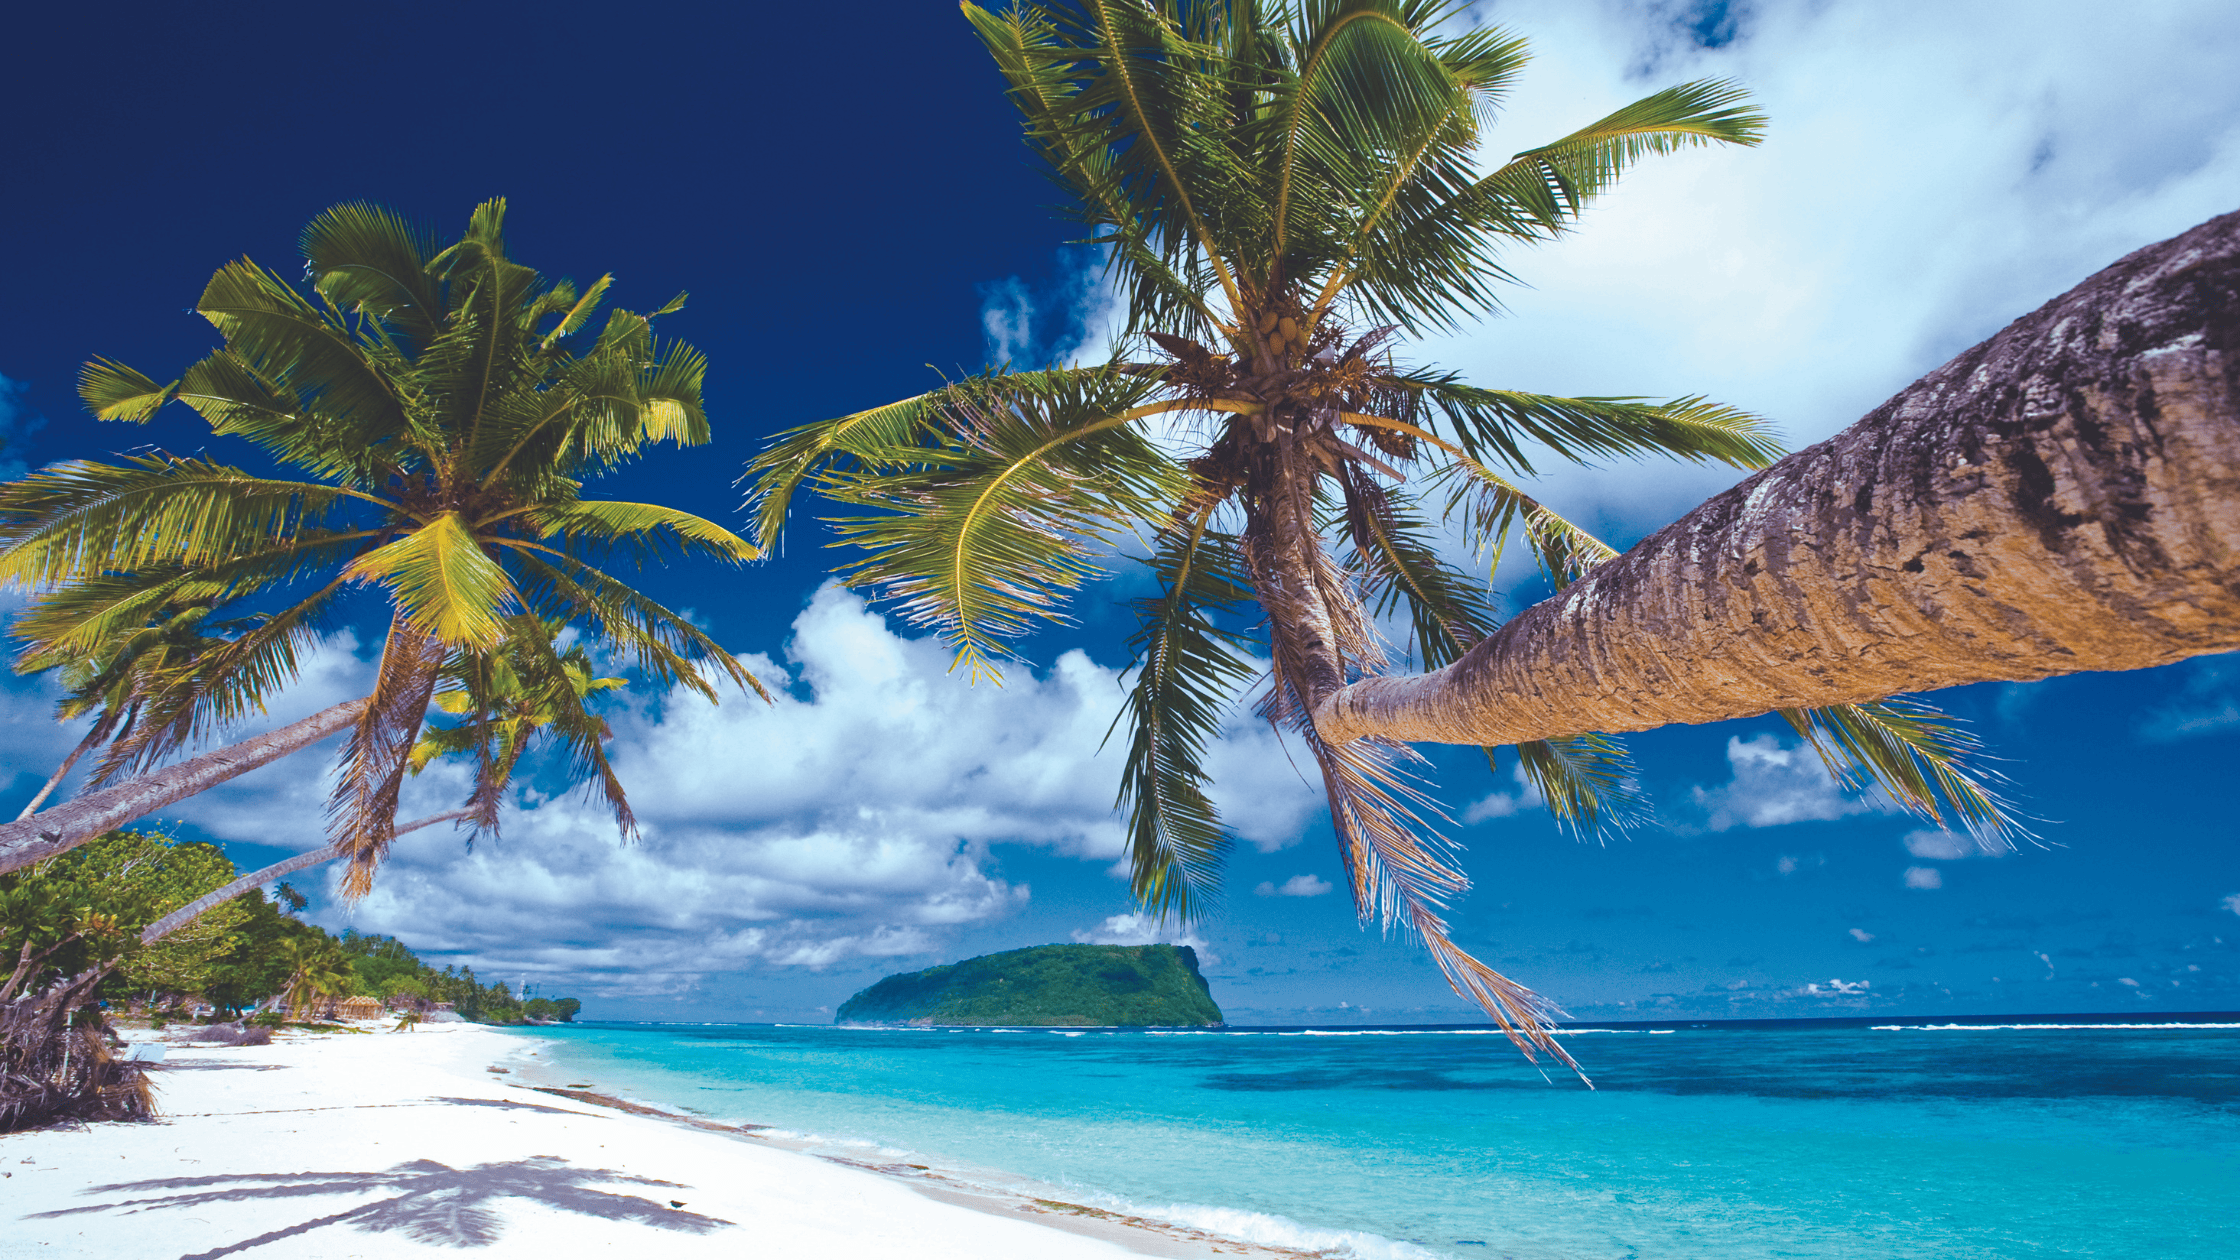 8 reasons why Samoa should be your next tropical holiday destination